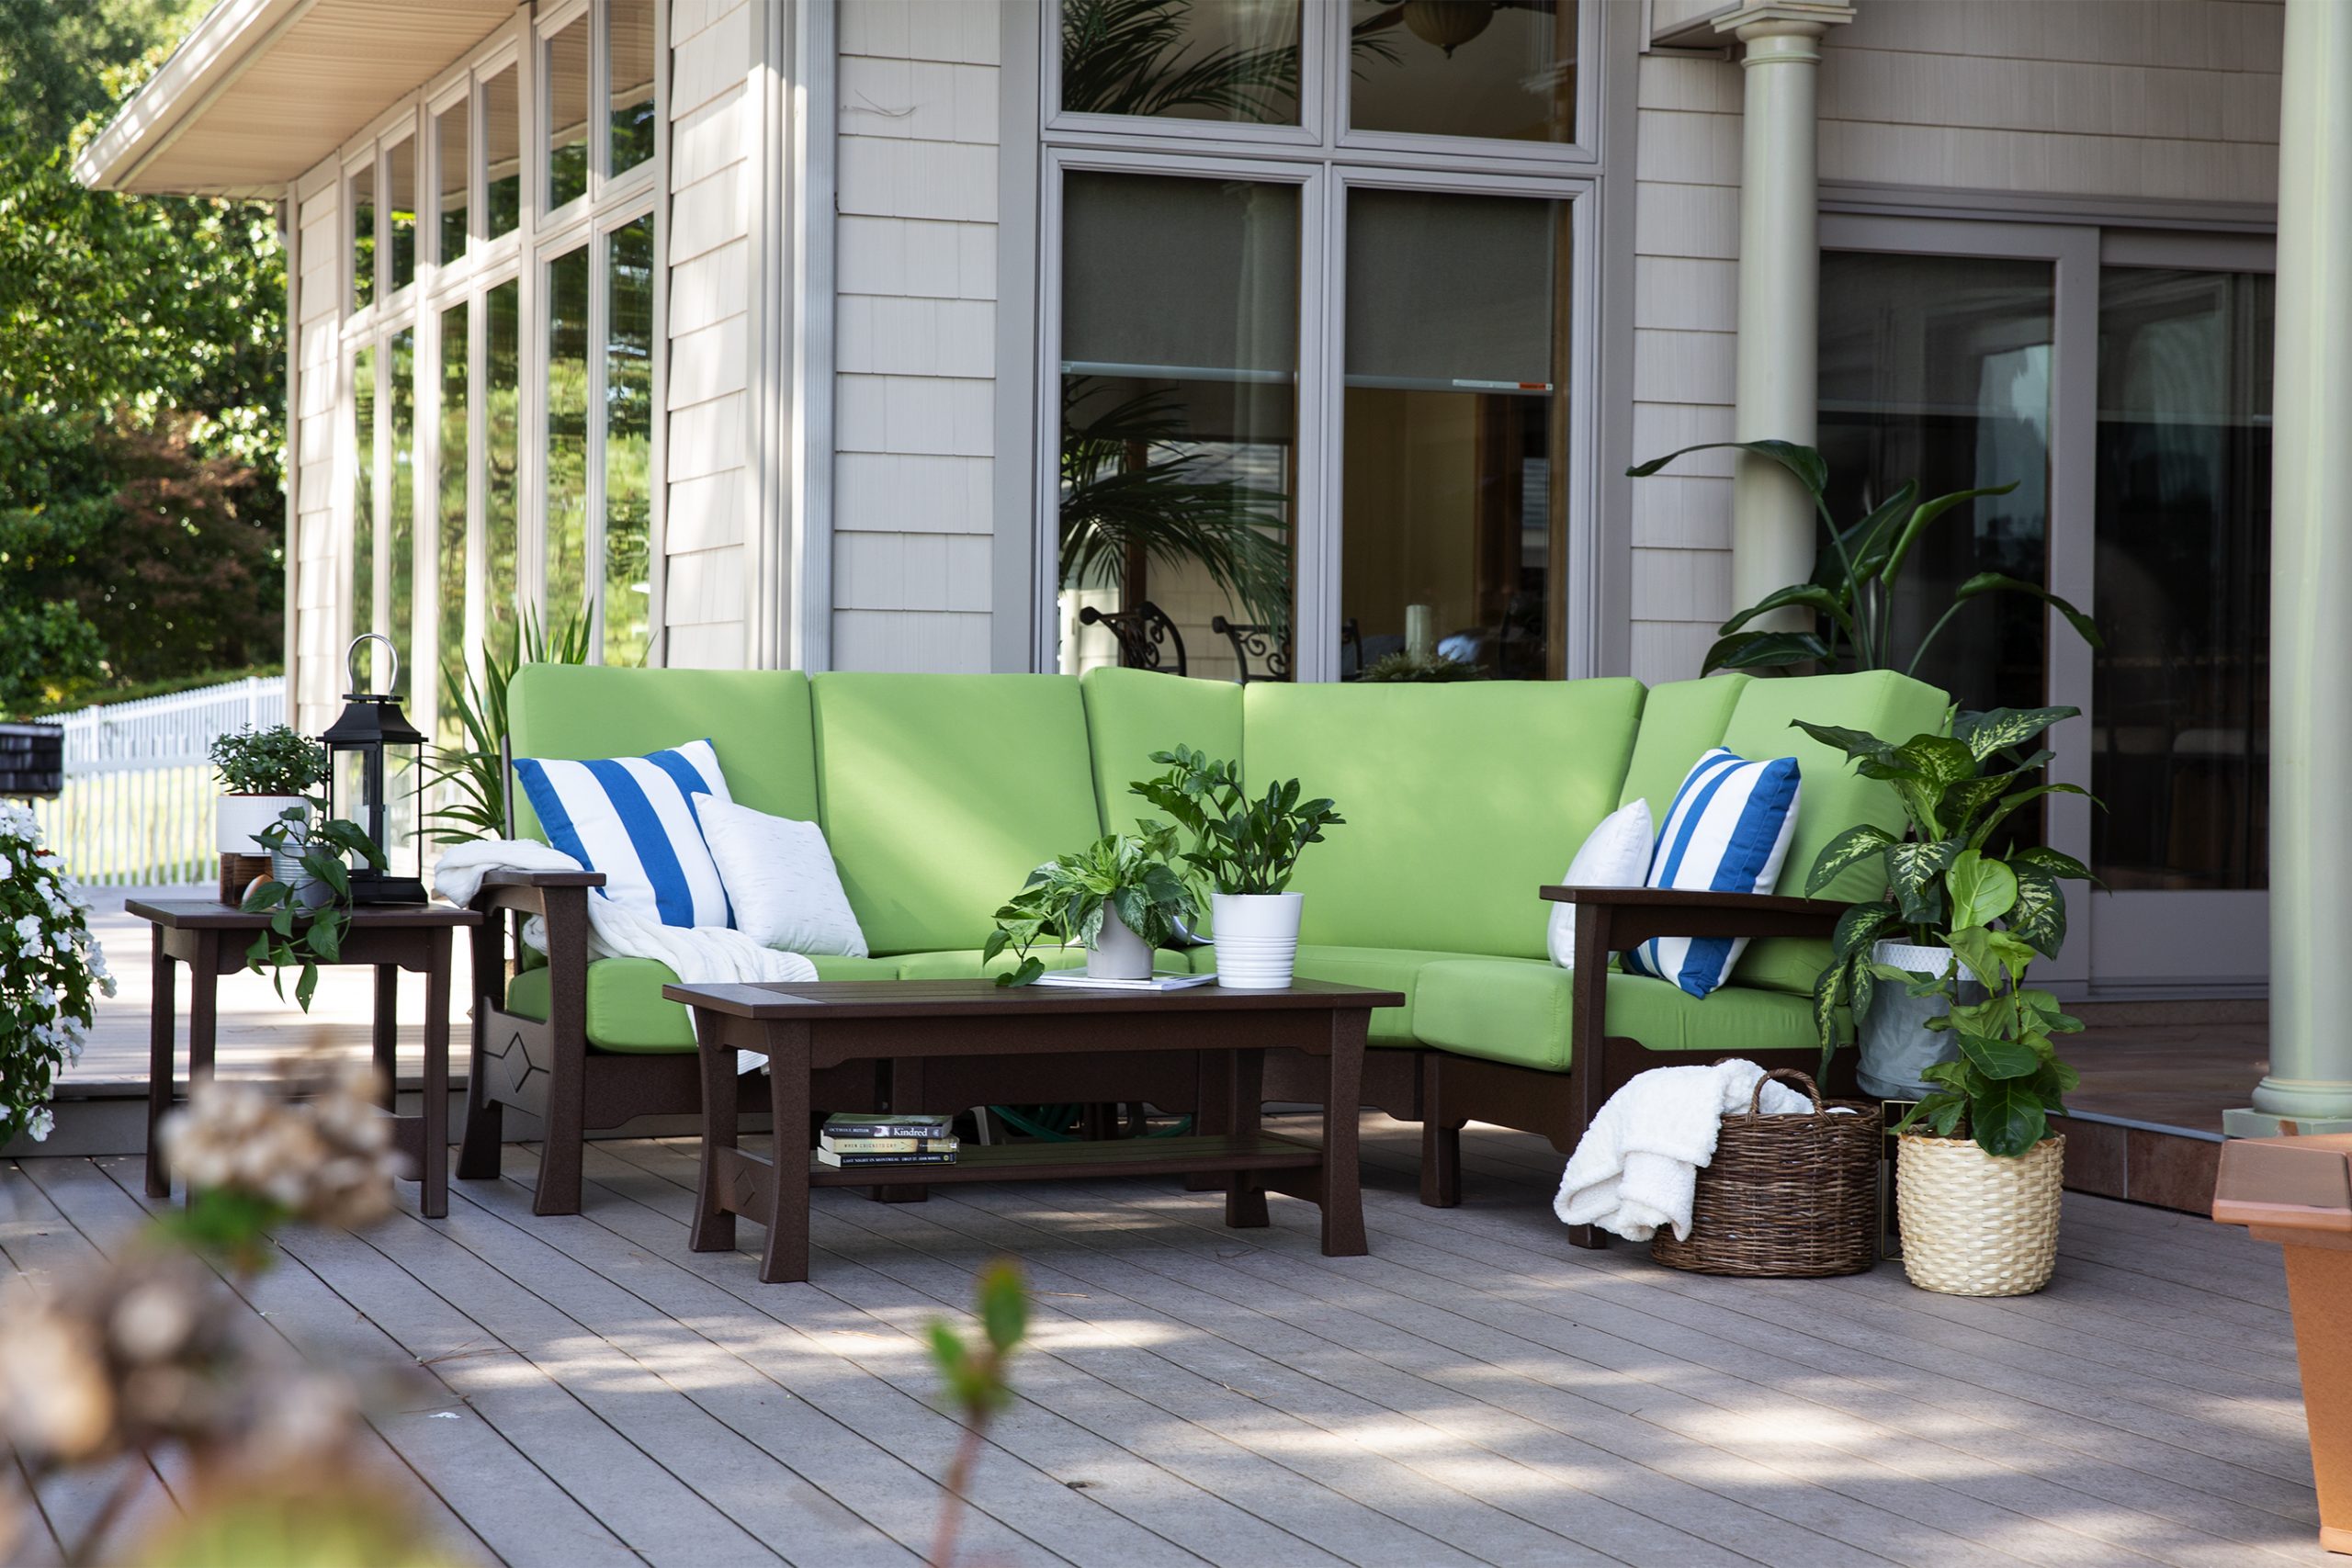 Green Outdoor sectional with striped pillows and table on deck next to house